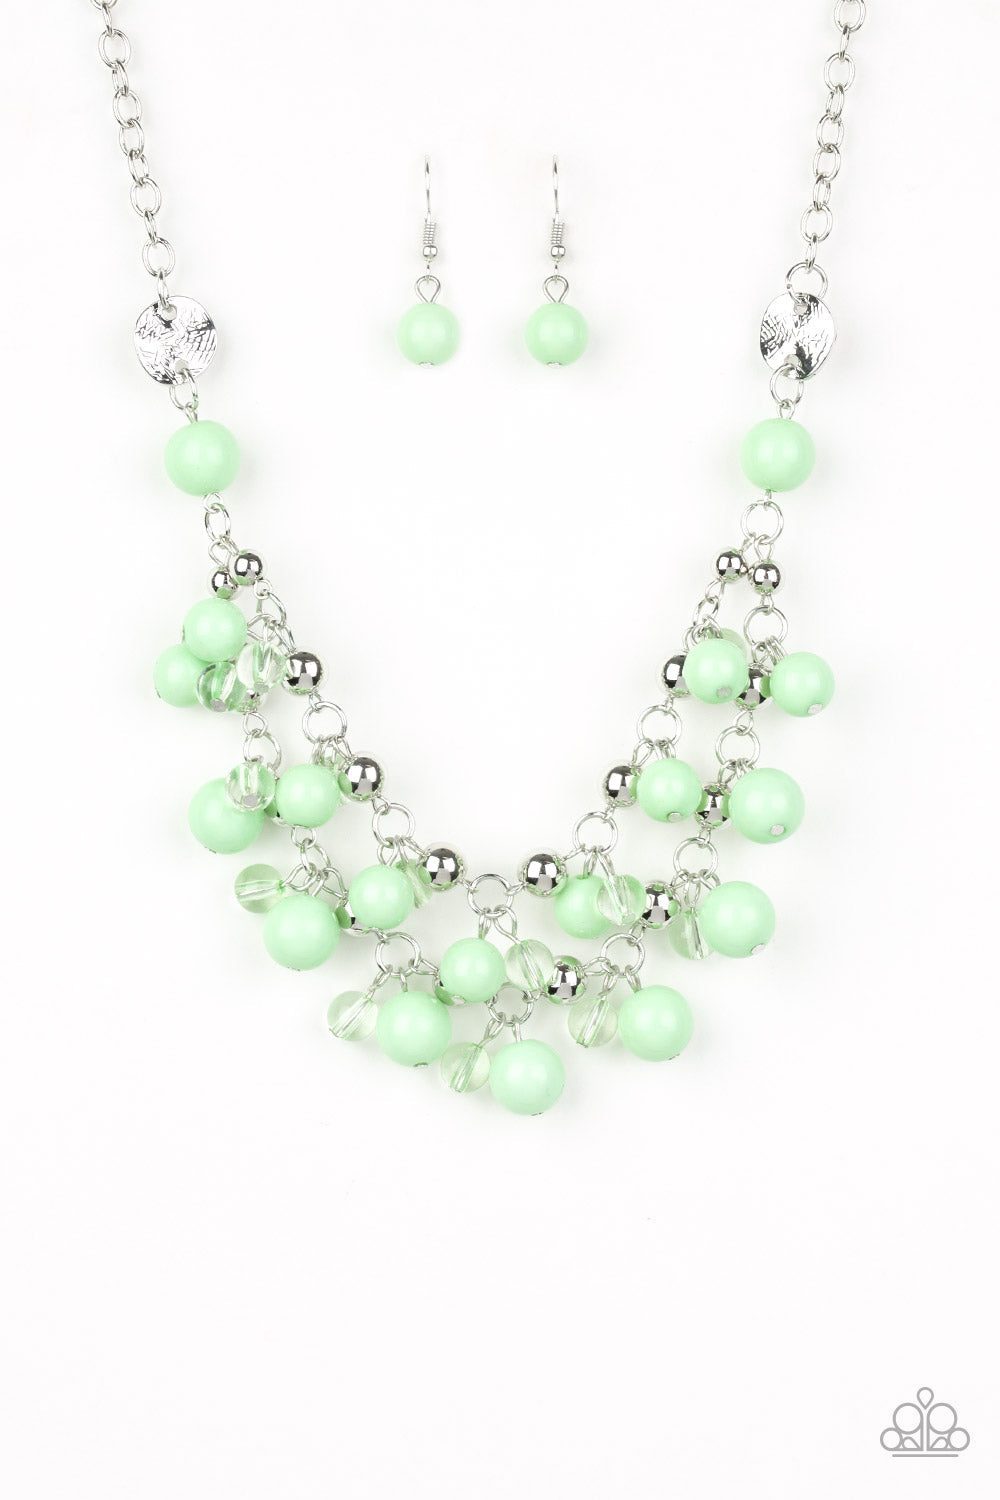 Paparazzi Seaside Soiree - Green - Silver Chain Necklace and matching Earrings - $5 Jewelry with Ashley Swint